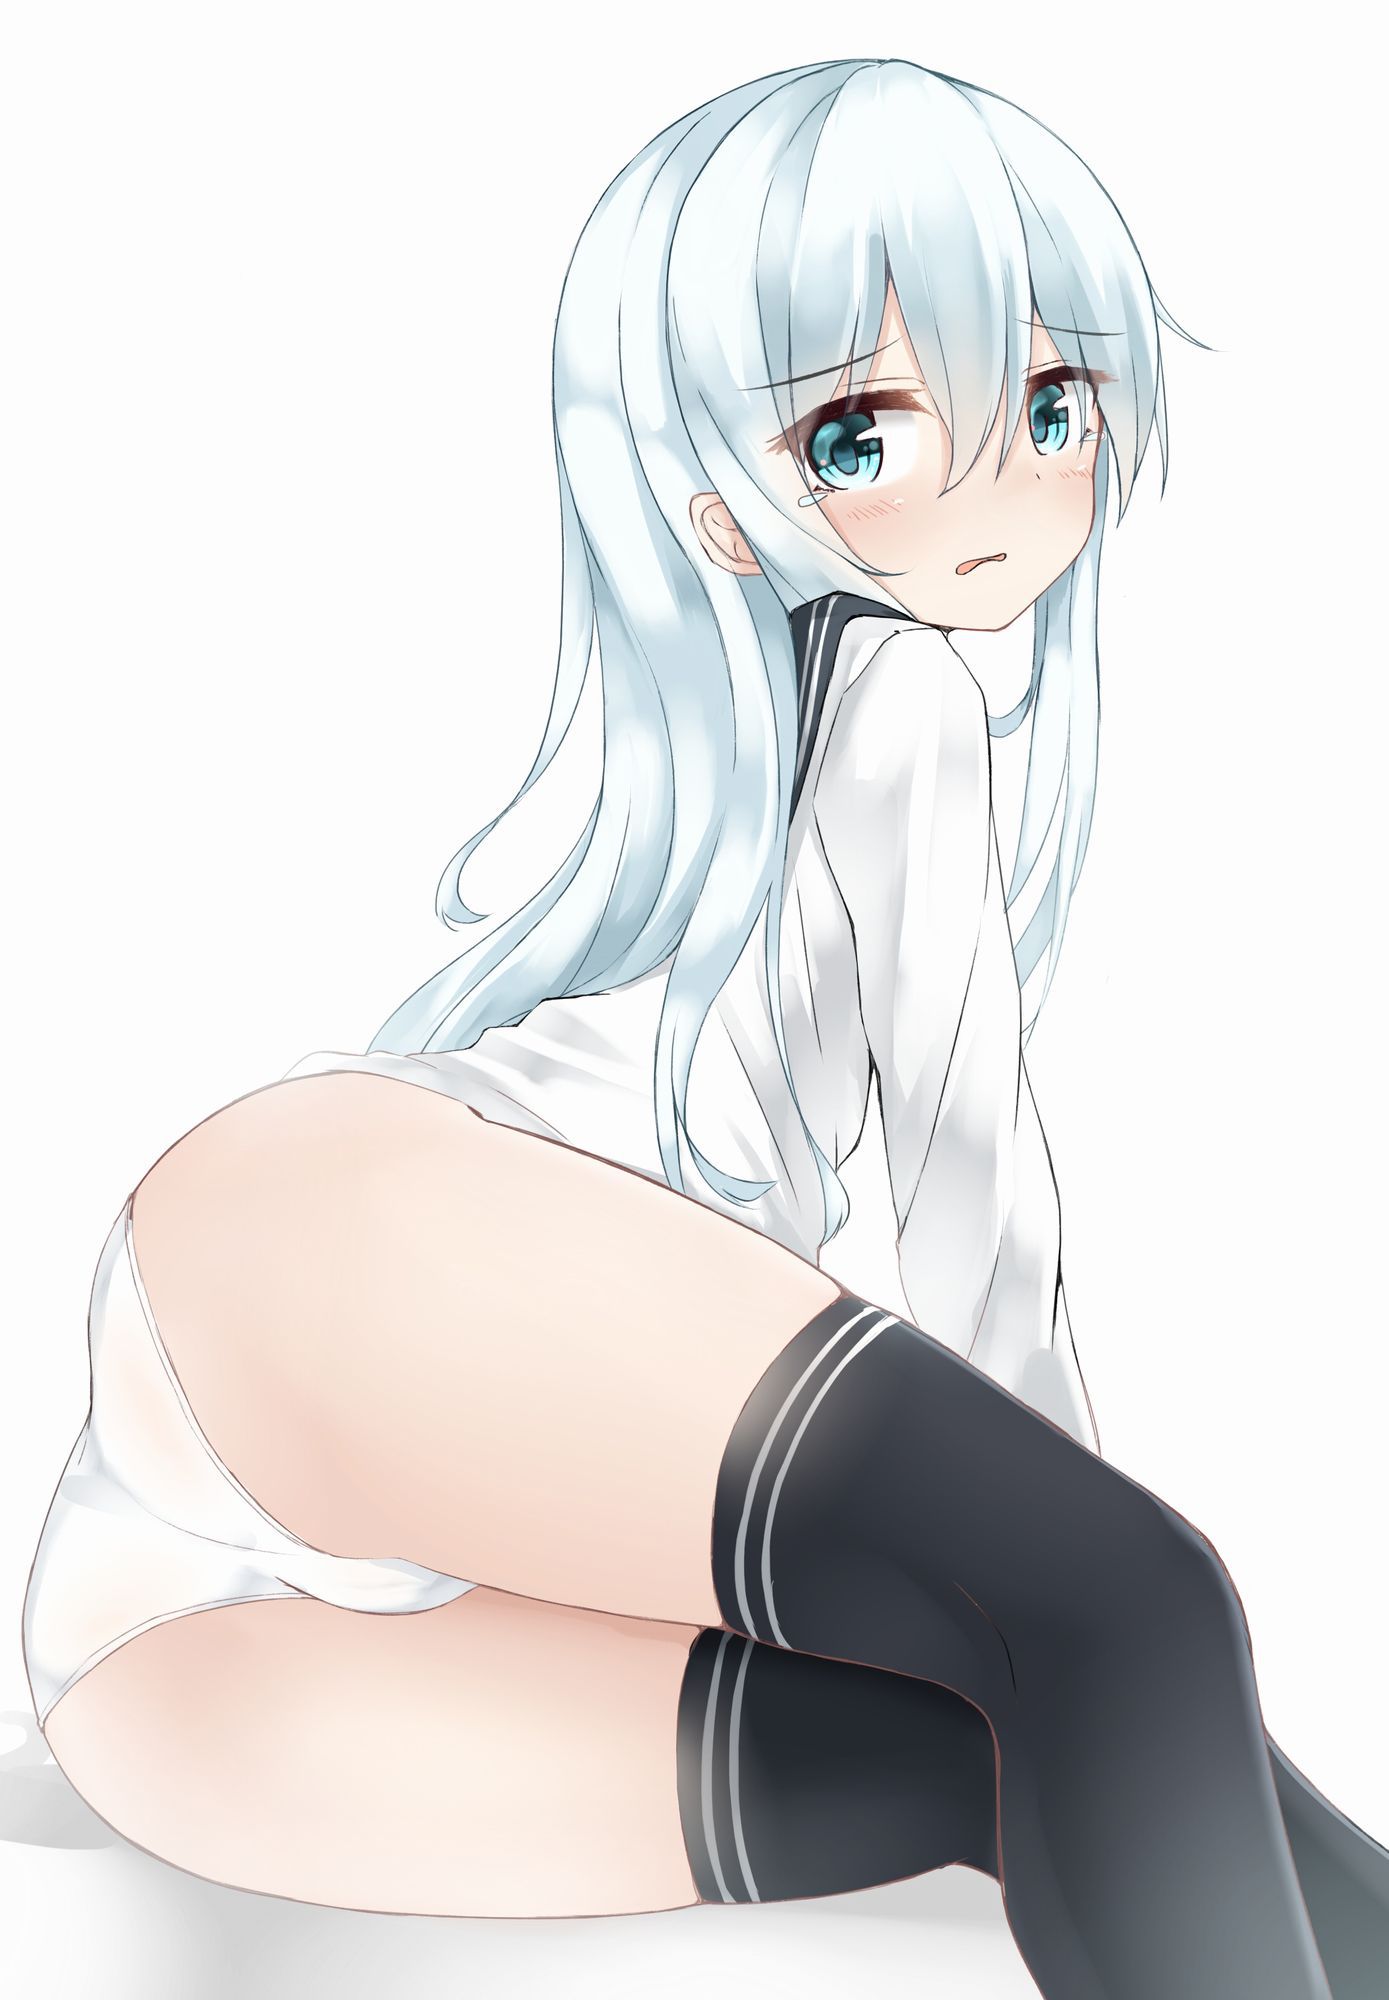 Two-dimensional erotic image that I want to look at loli pants of insanely cute little girls 5